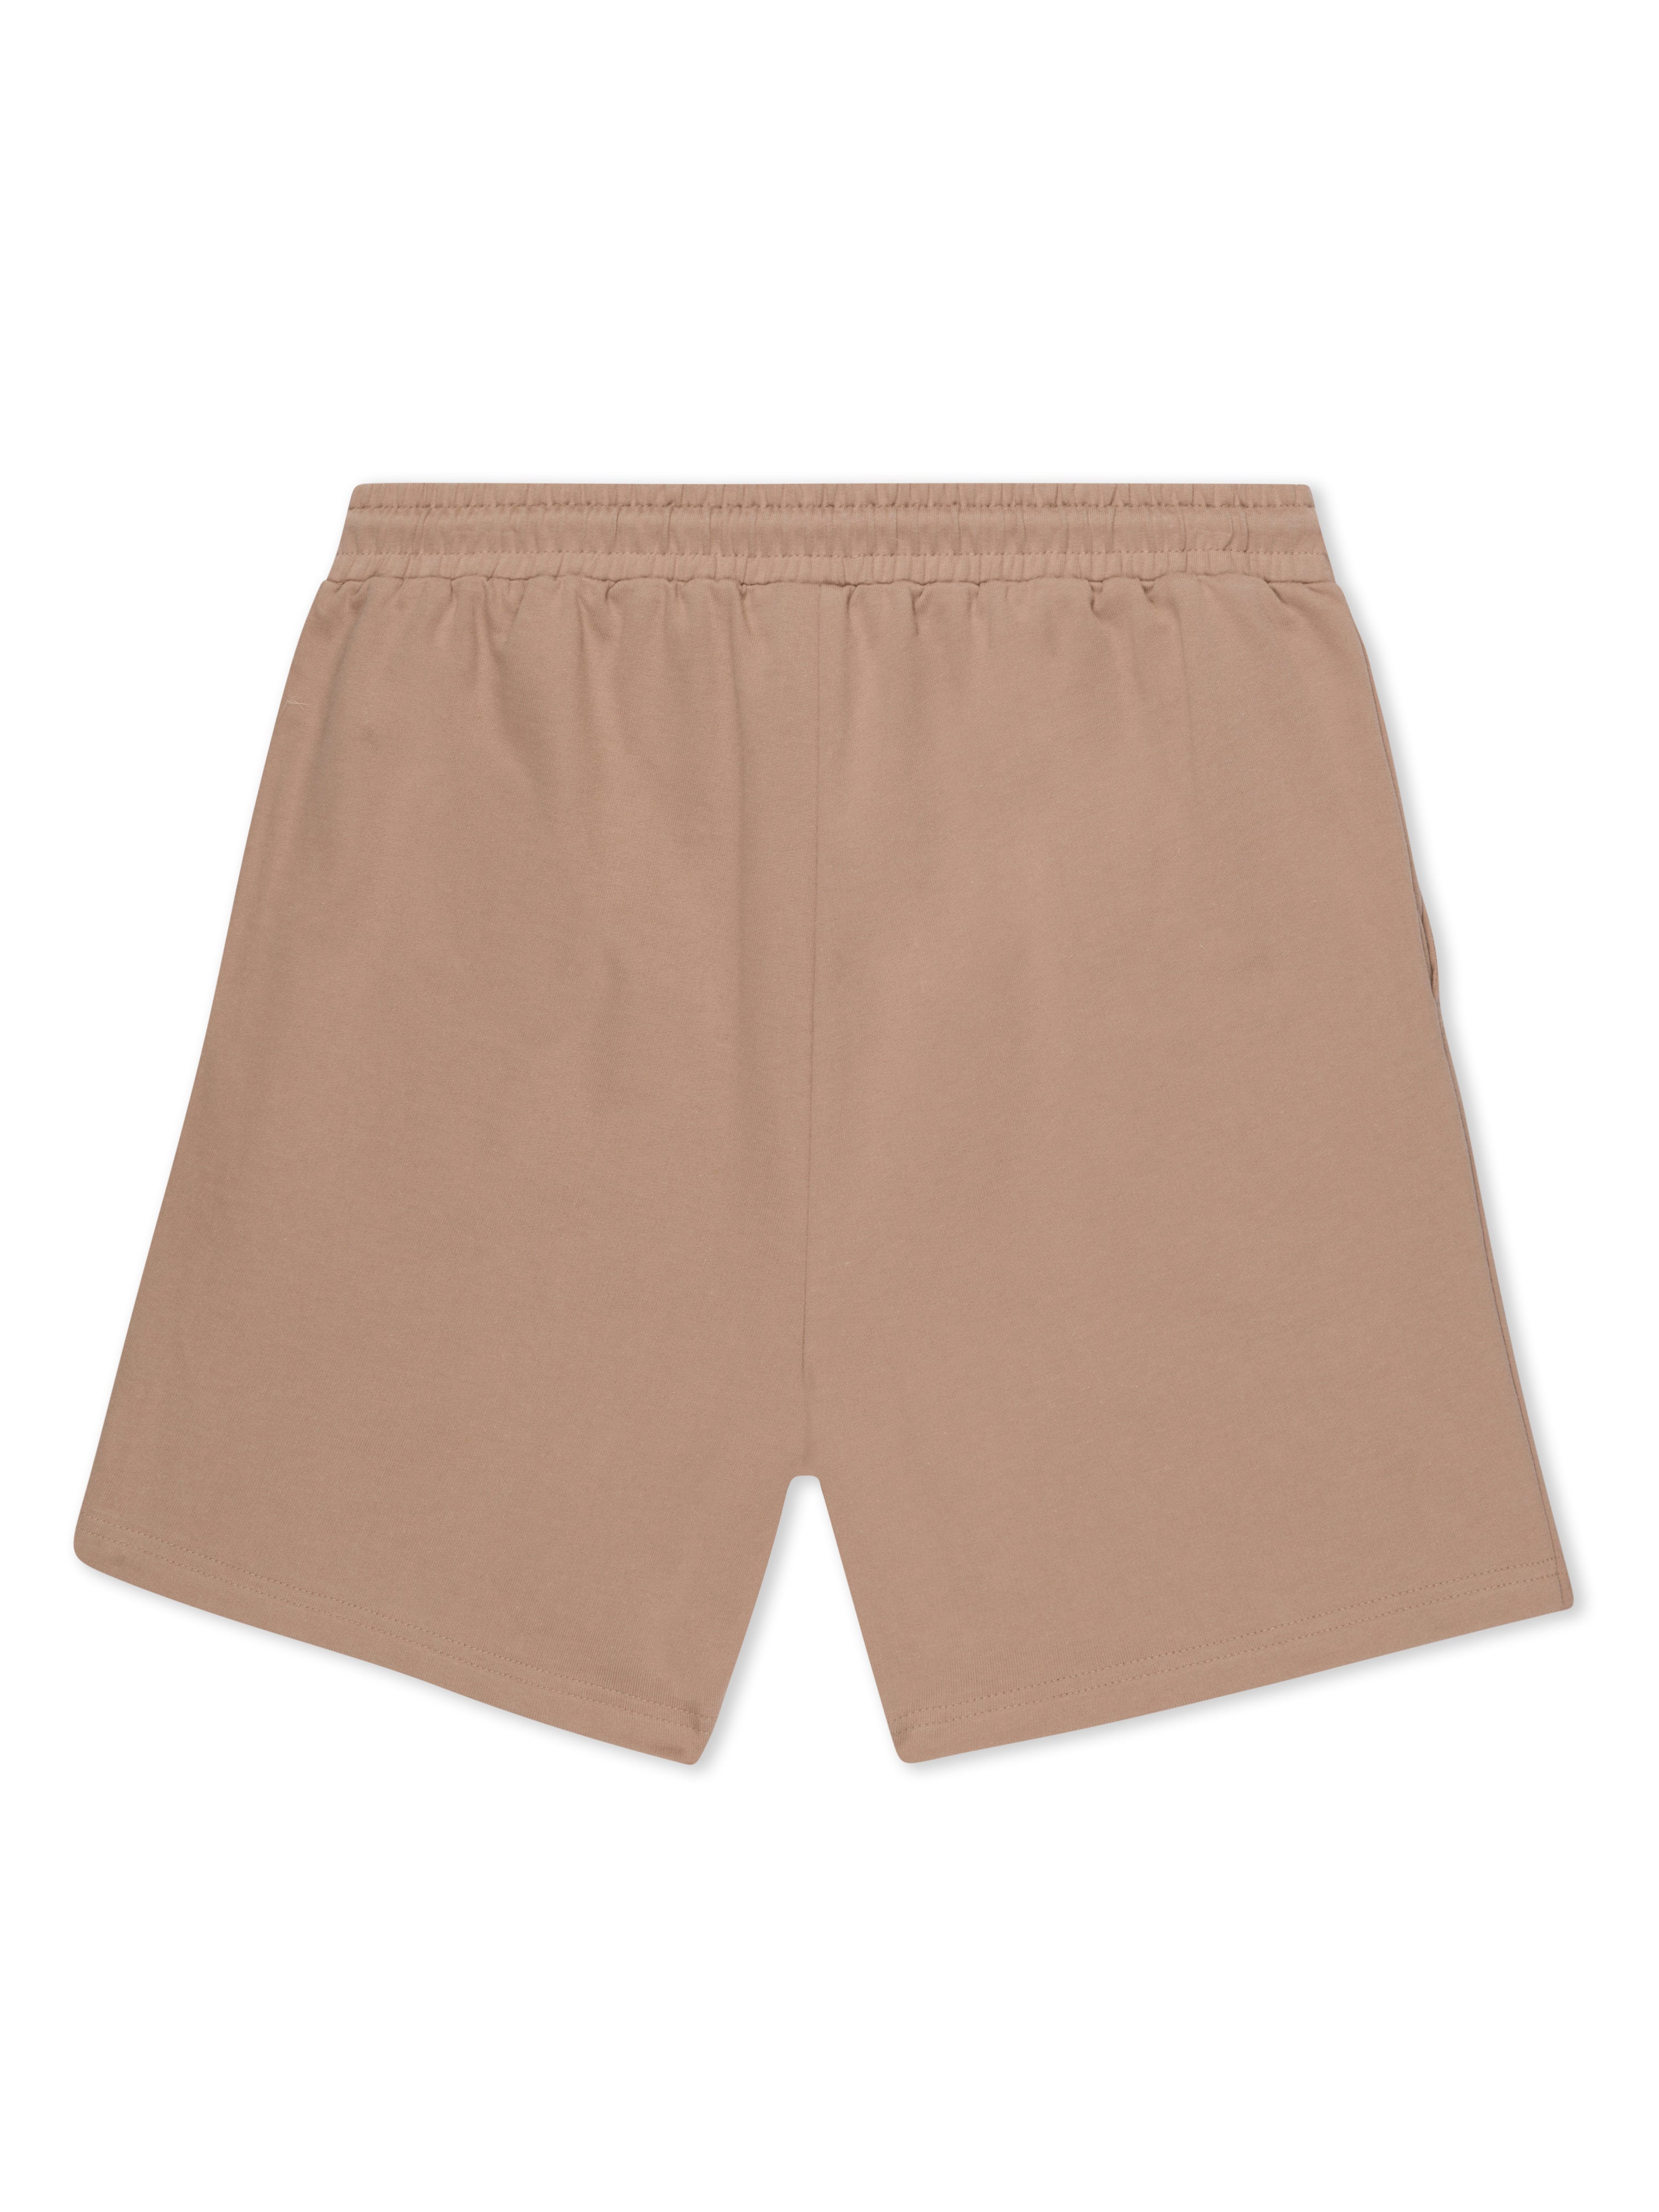 back of sand coloured shorts made with natural cotton